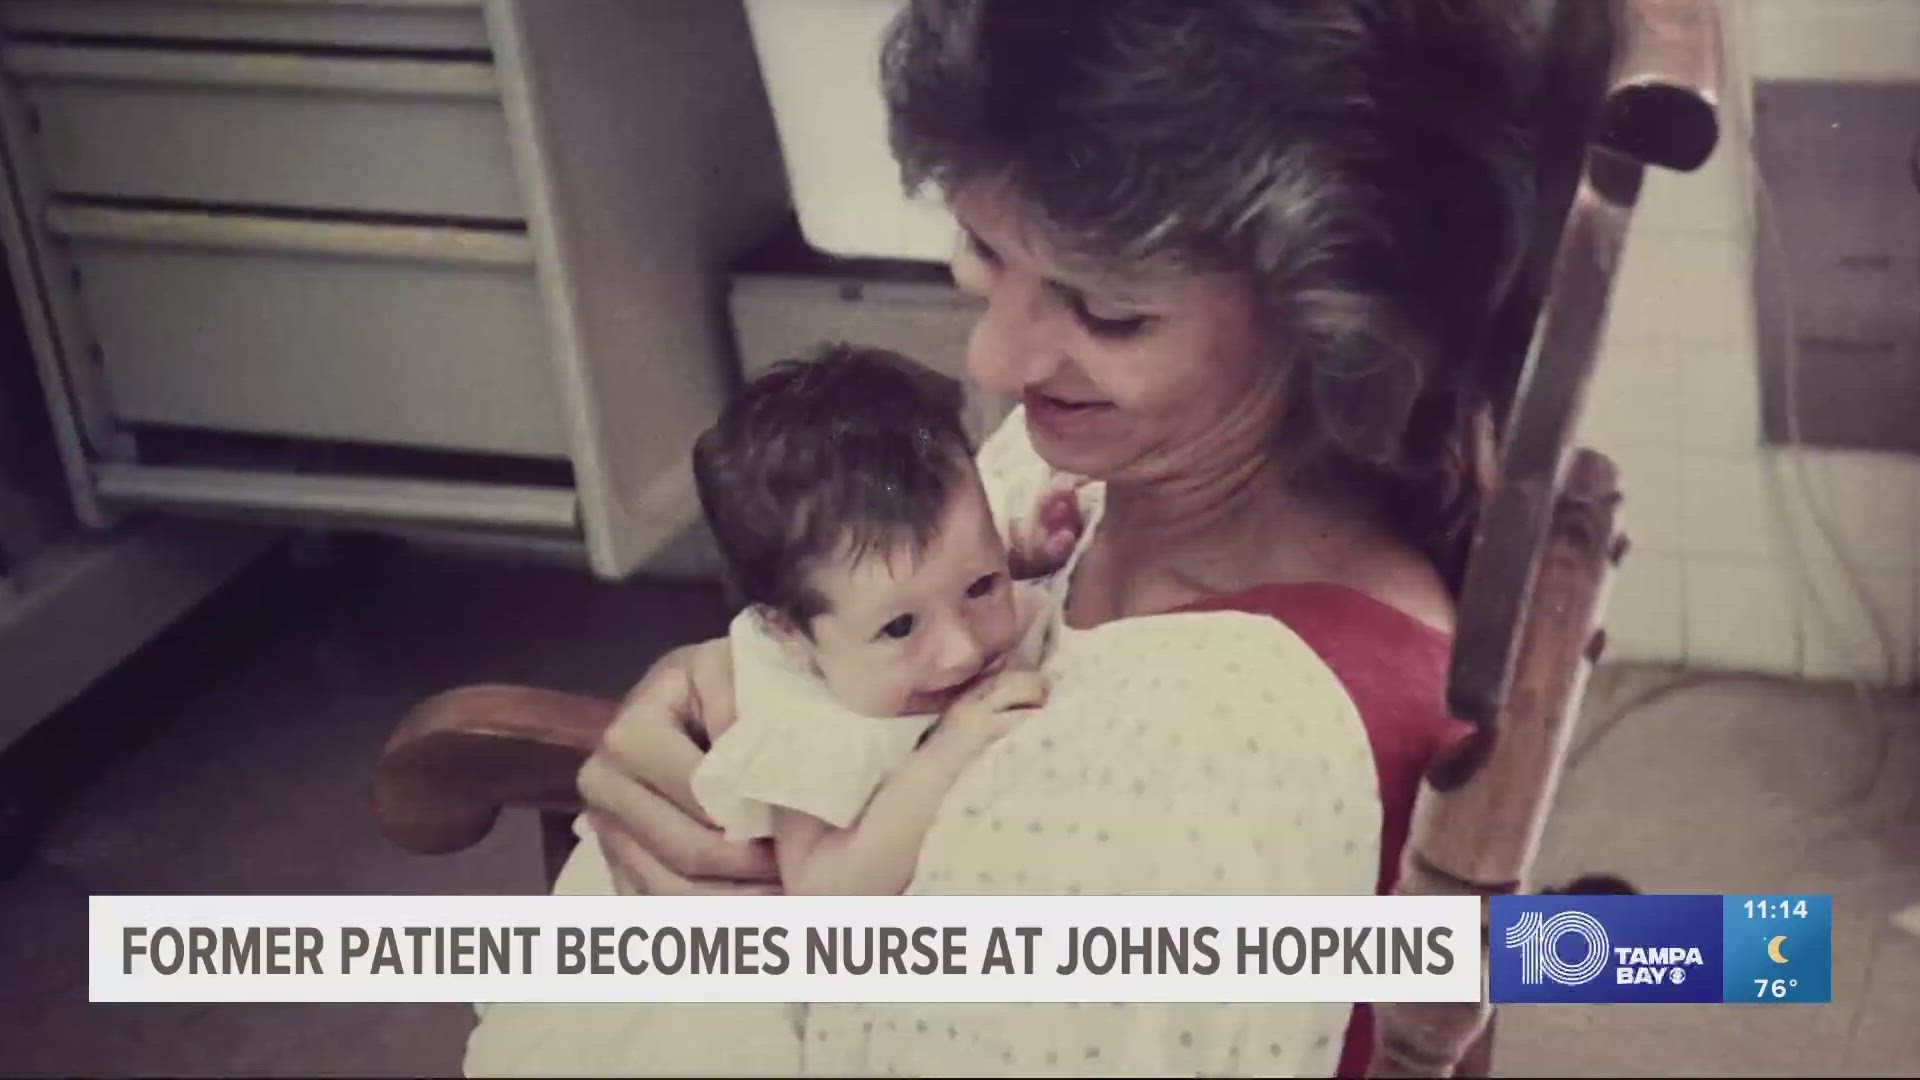 More than 30 years later, Kristin Moen has made a career in nursing, including a stretch in the NICU at Johns Hopkins All Children's Hospital in St. Petersburg.